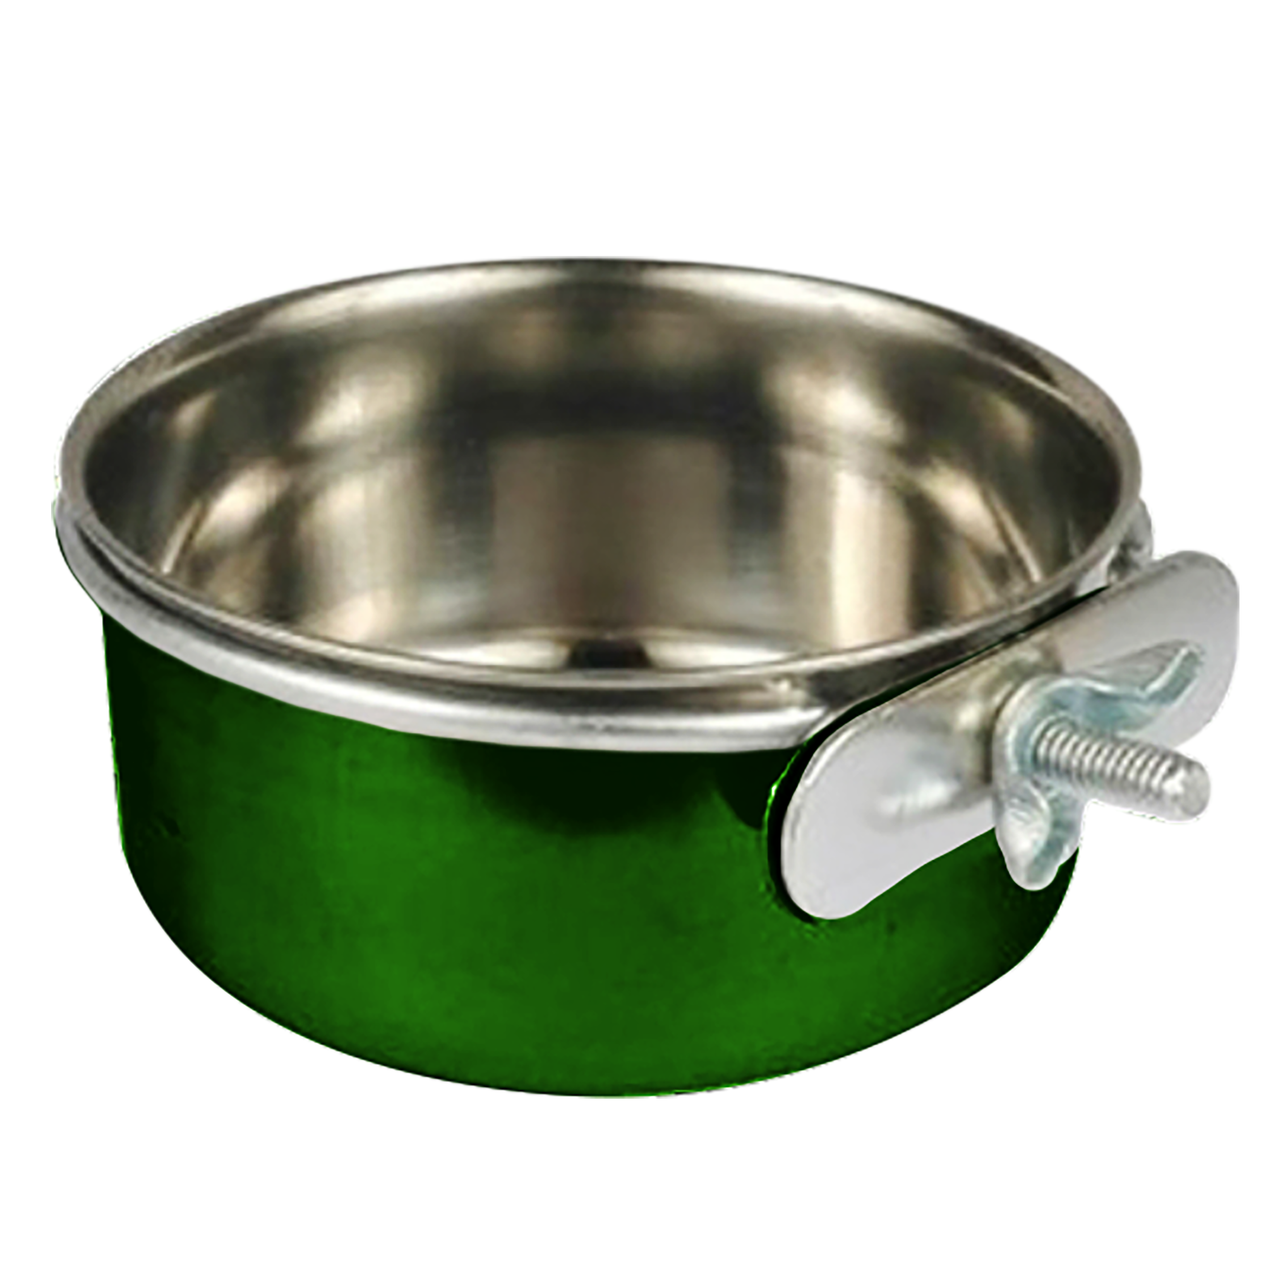 A & E Cages Coop Cup with Ring & Bolt Green 10oz